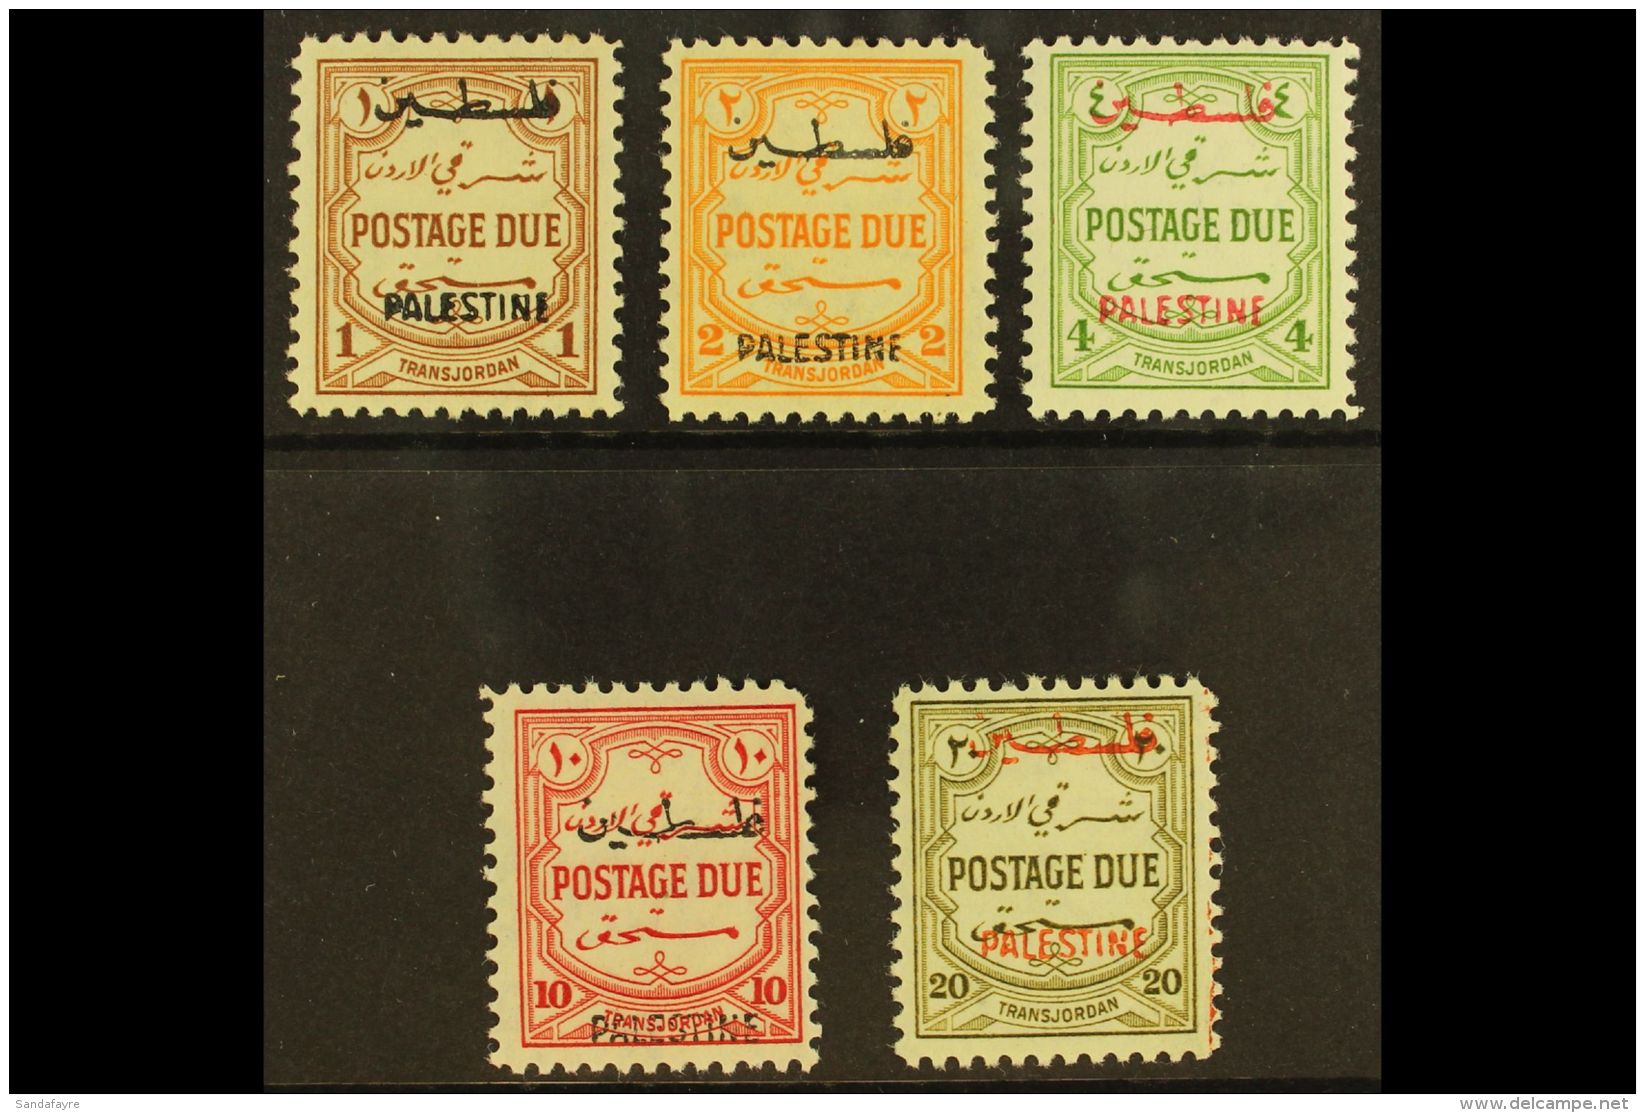 OCCUPATION OF PALESTINE 1948 Postage Due Set, Perf 12, Complete, SG PD25/9, Very Fine And Fresh Mint. (5 Stamps)... - Jordan